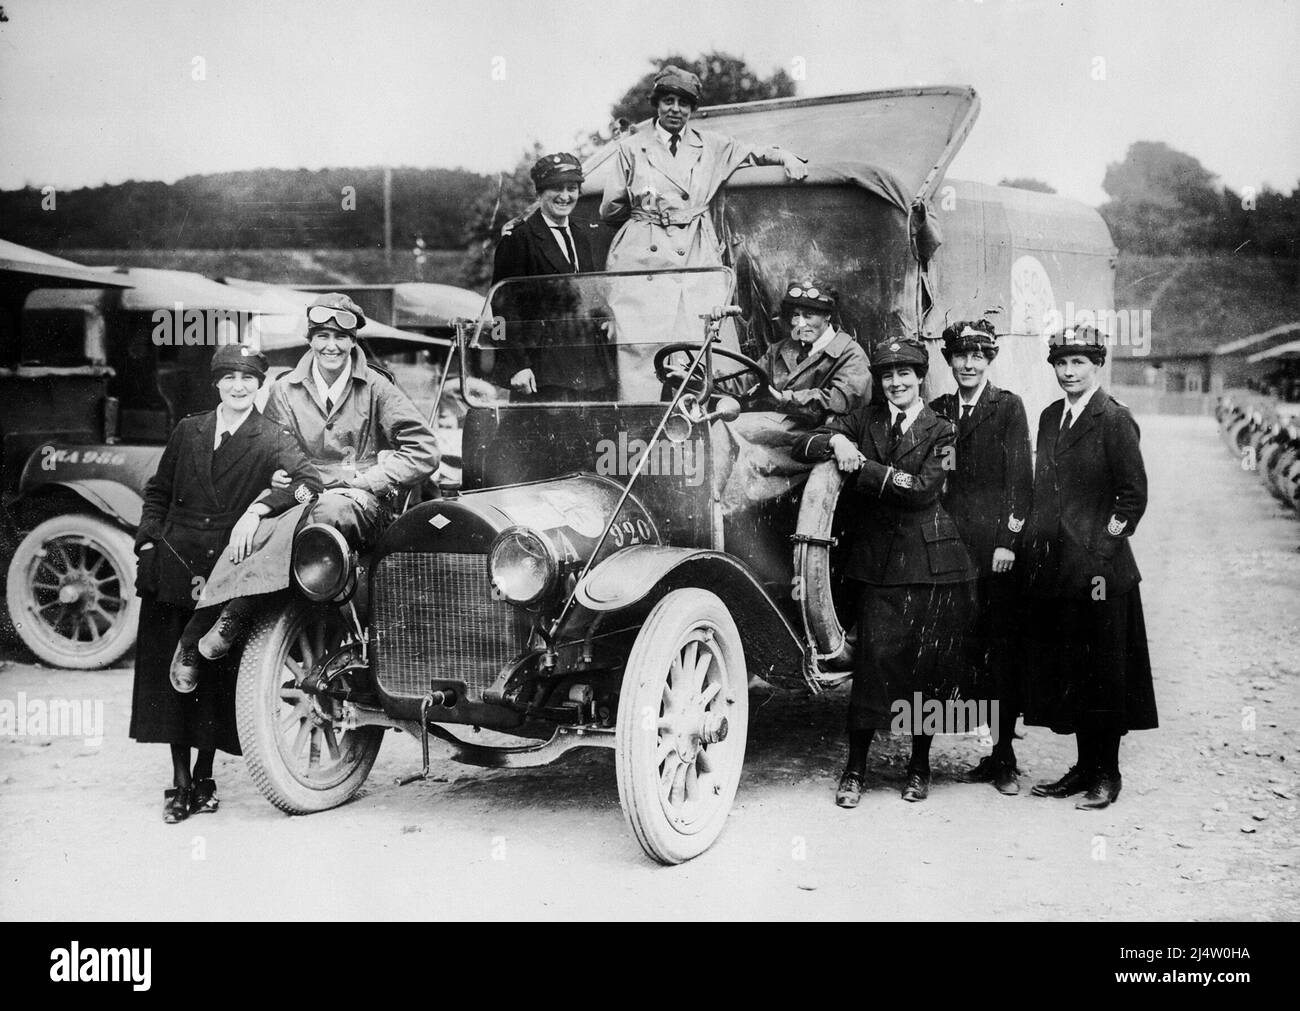 Female ambulance staff from the VAD (Voluntary Aid Detachment) pose for the camera with their ambulance, France, during World War I. Stock Photo